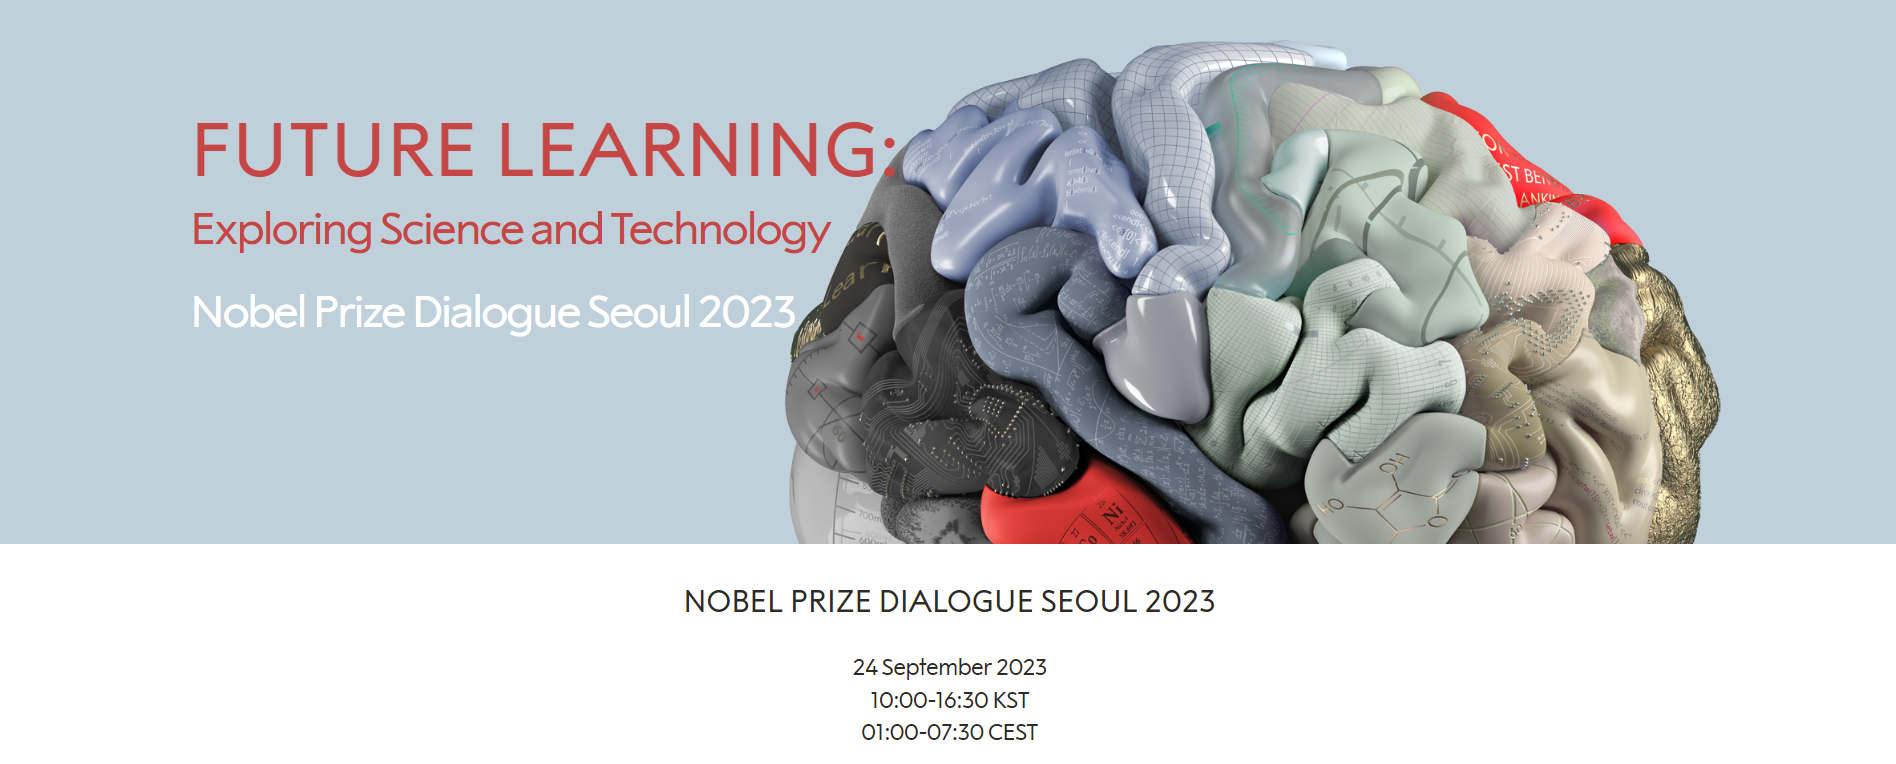 Porosome Therapeutics, Inc., Chairman, Prof. Dr. Bhanu P. Jena  and Chairman of the Scientific Advisory Board, Prof. Dr. Joachim Frank have been invited to participate at the Nobel Prize Dialogue being held in Seoul, South Korea on September 24th 2023.